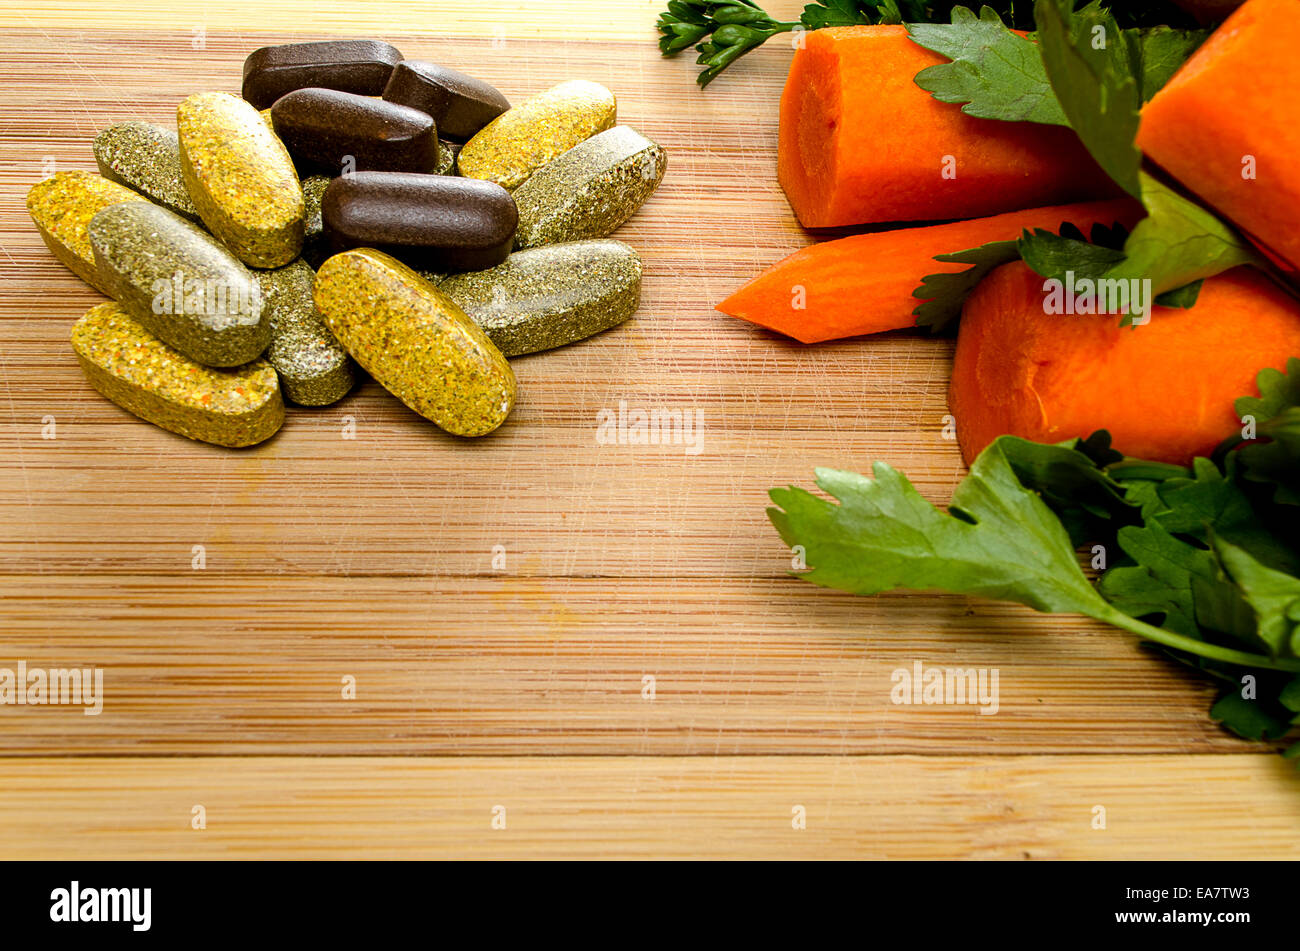 This is organic vegetables and vitamins. Stock Photo